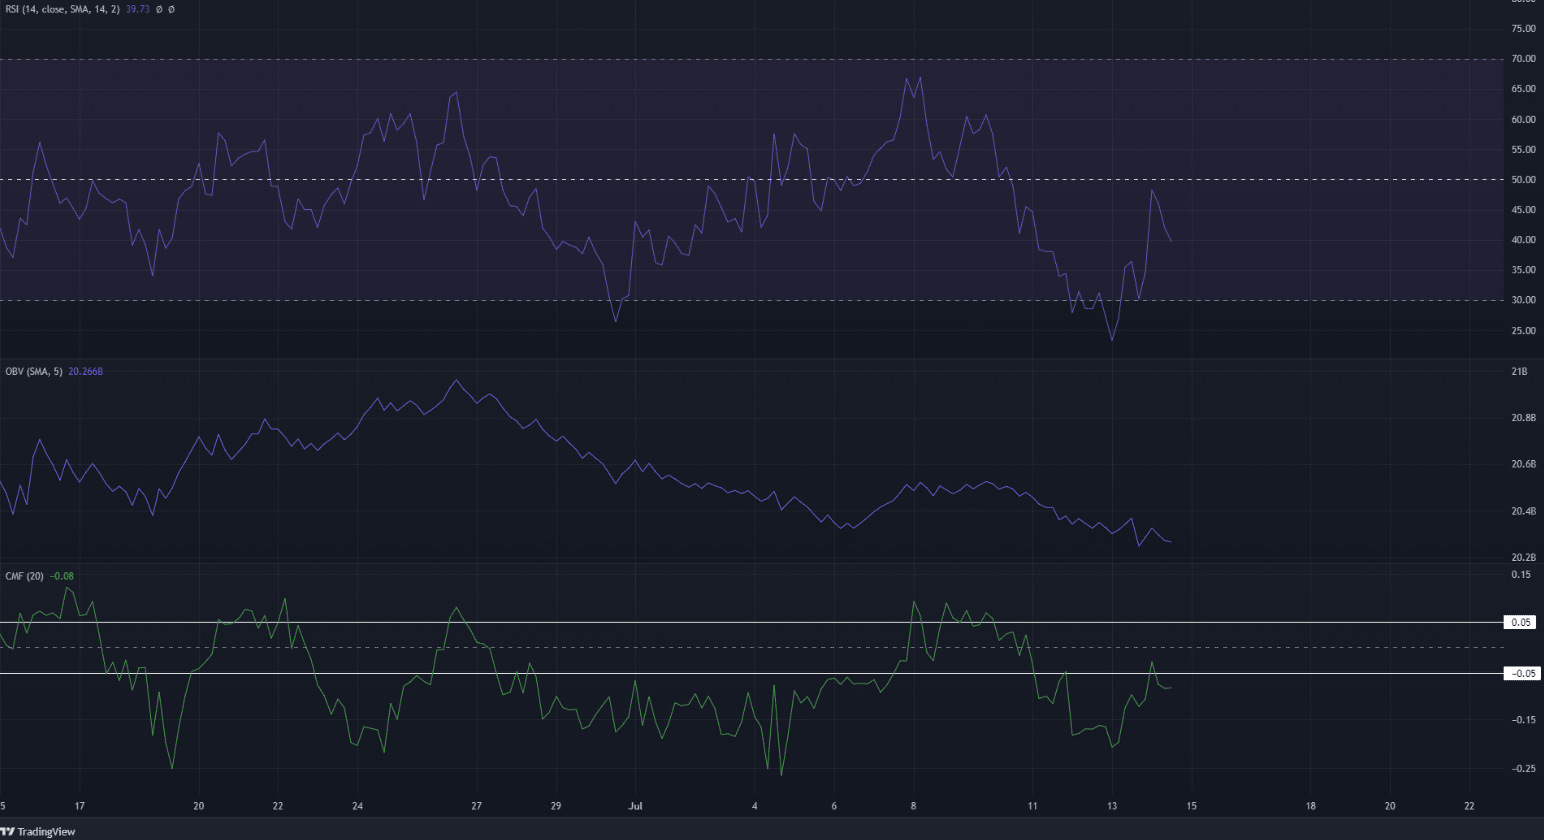 Cardano falls beneath a month-long range, can another 10% tumble follow?